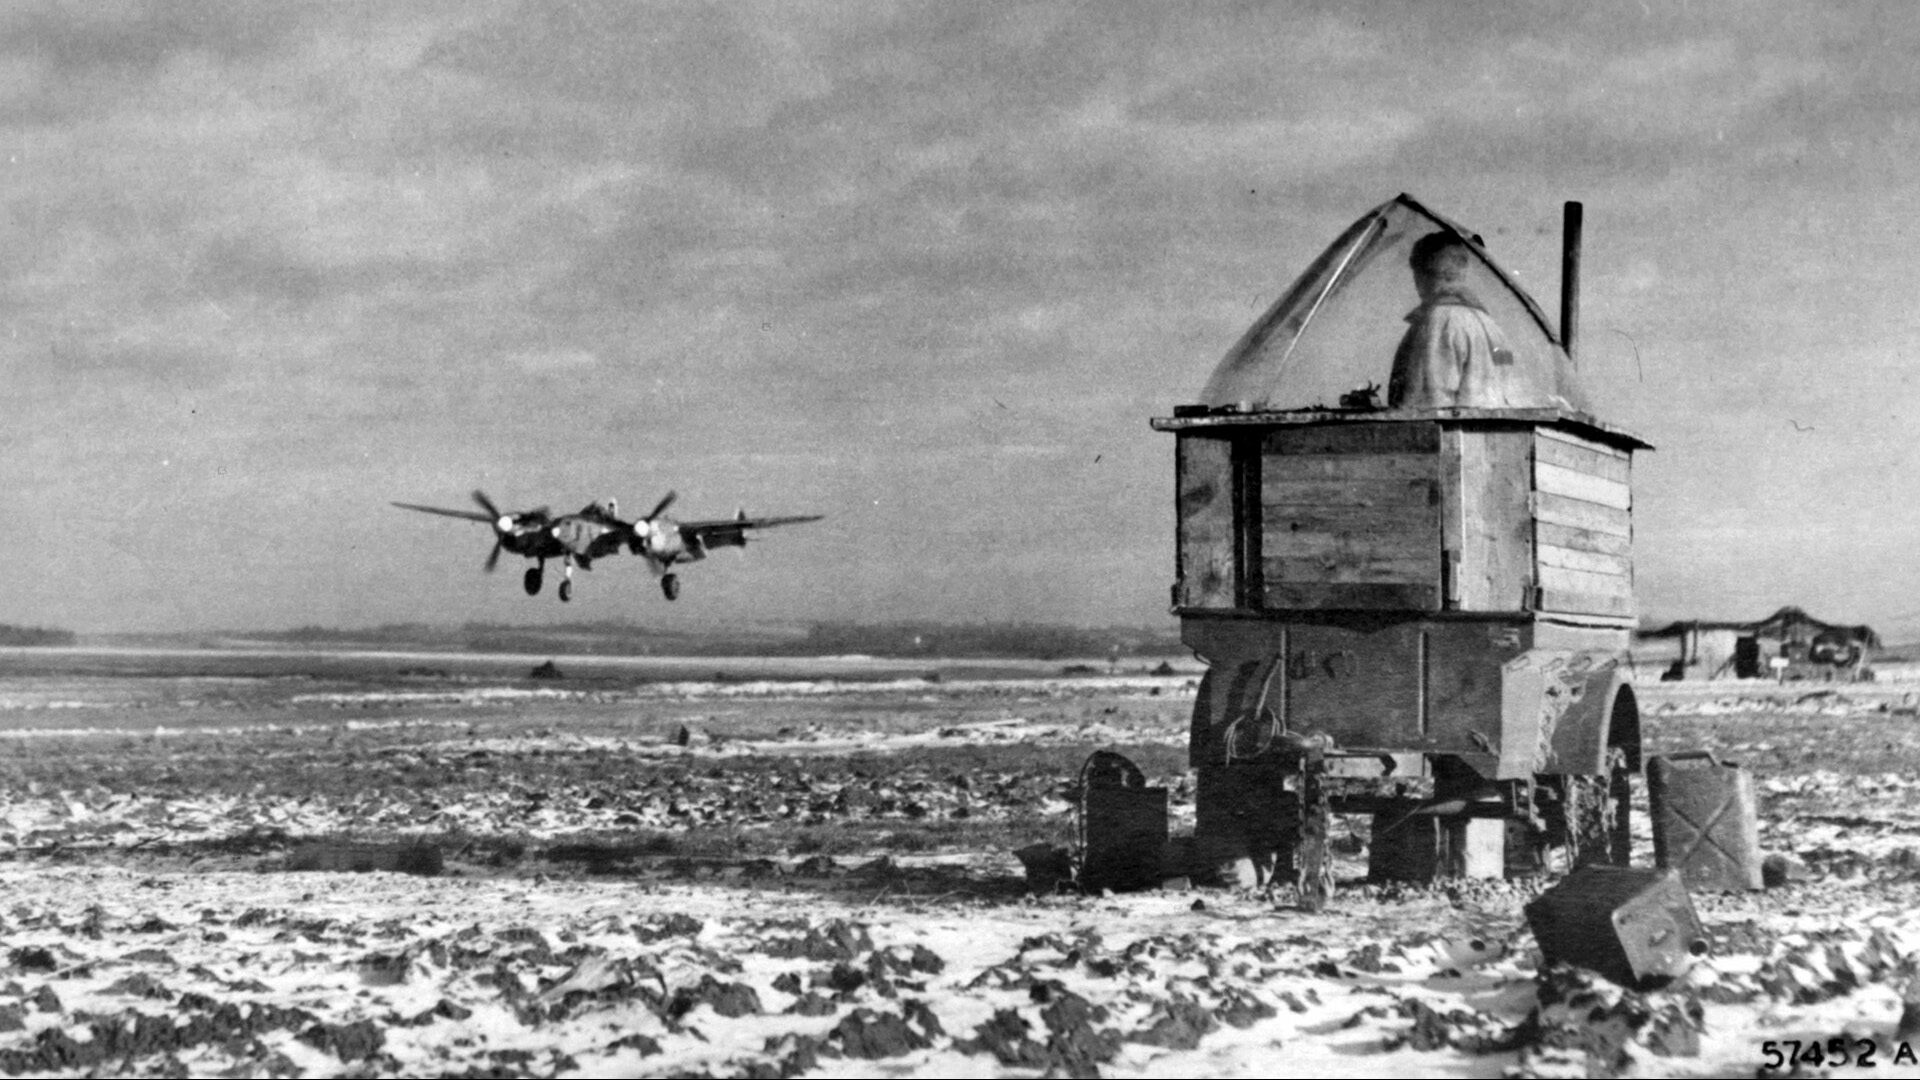 As a P-38 Lightning fighter of the 474th Fighter Group lands at a forward base in Belgium, the air tower on wheels in the foreground, with a ground crewman manning the post, is indicative of the mobile aspect of the Ninth Air Force. Tactical air support provided a critical element in the sustained advance of Allied ground forces into Germany. 